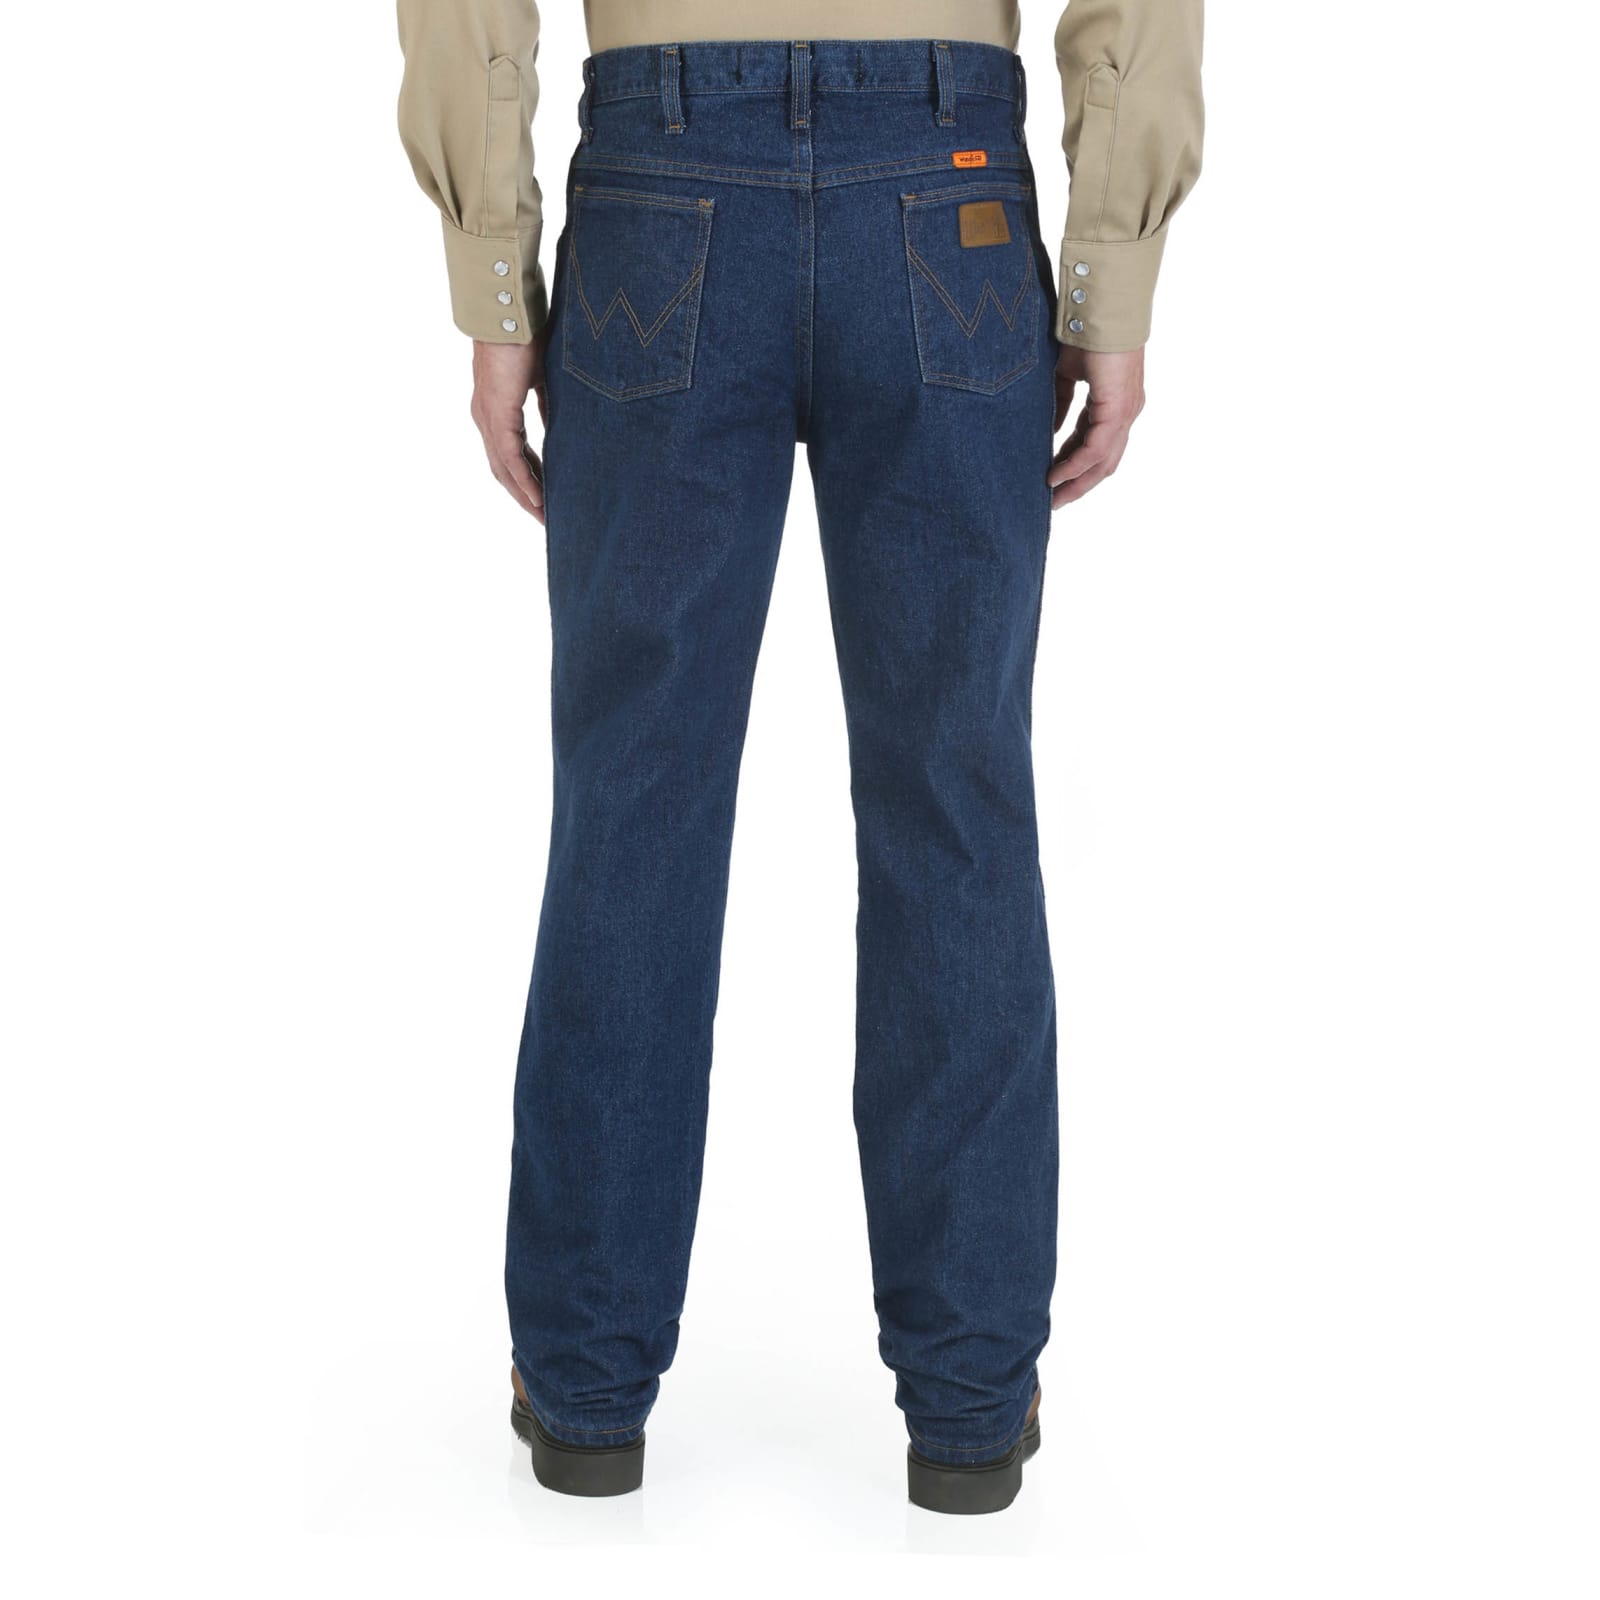 Wrangler Men's Cowboy Cut Slim Fit Pre-Washed FR Work Jean available at  Cavenders